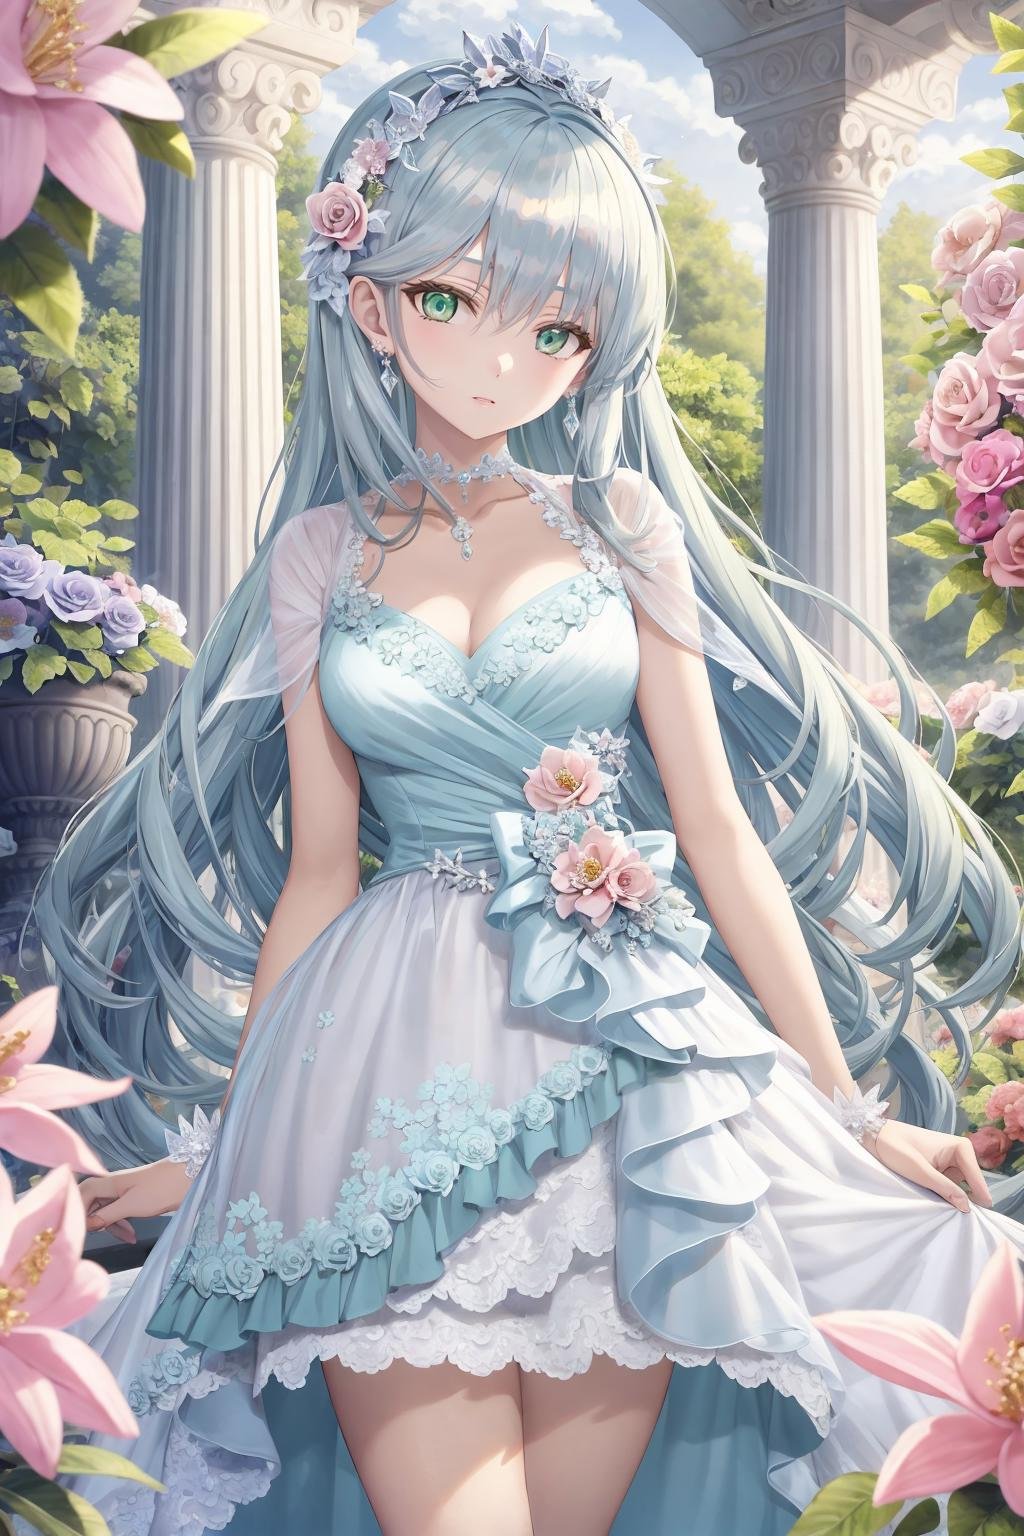 anime girl who is very beautiful, in the style of light silver and light pink, intricate, delicate flower and garden paintings,rococo style dress, 32k uhd, barbizon school, dark white and green, shiny eyes, cartoon realism<lora:Torino_V71:1>